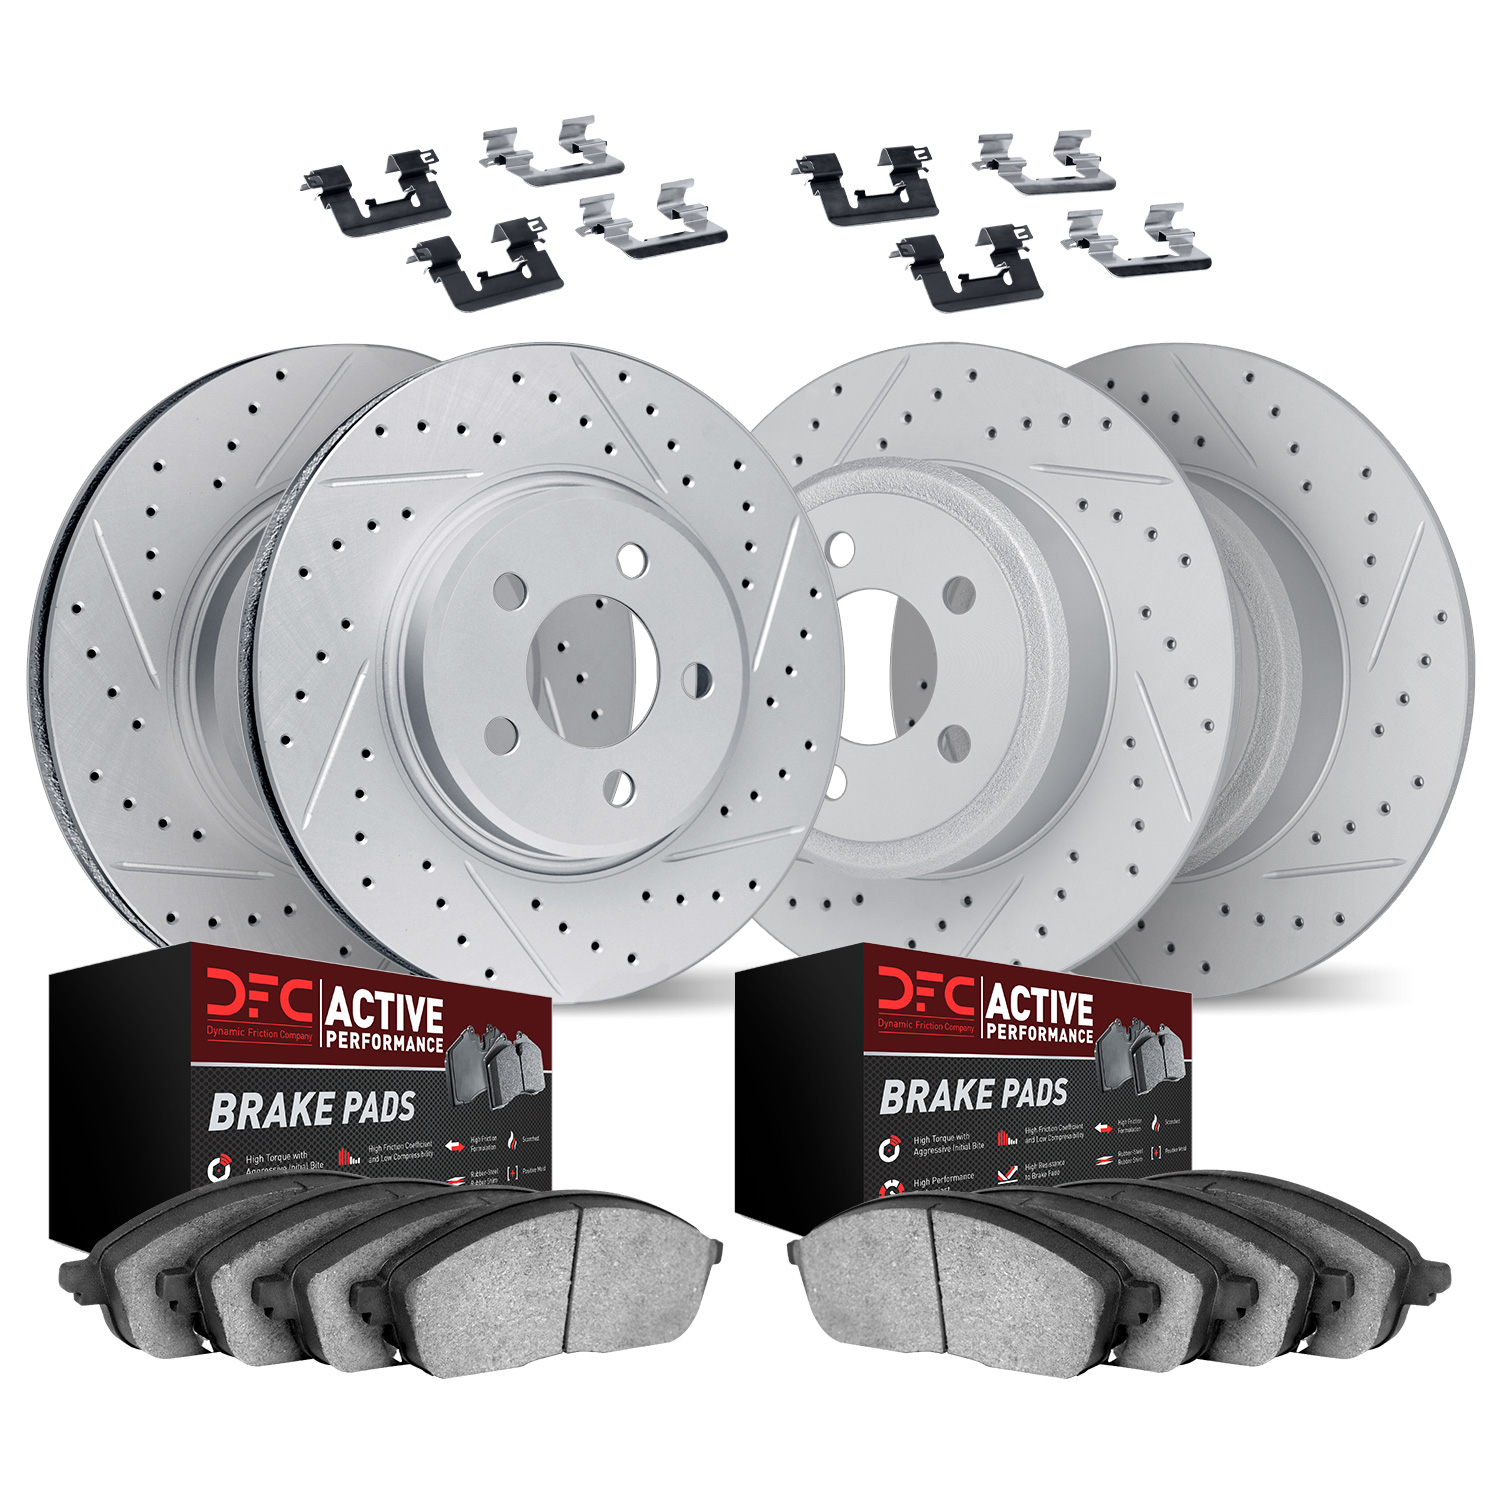 2714-74018 Geoperformance Drilled/Slotted Brake Rotors with Active Performance Pads Kit & Hardware, 2005-2013 Audi/Volkswagen, P